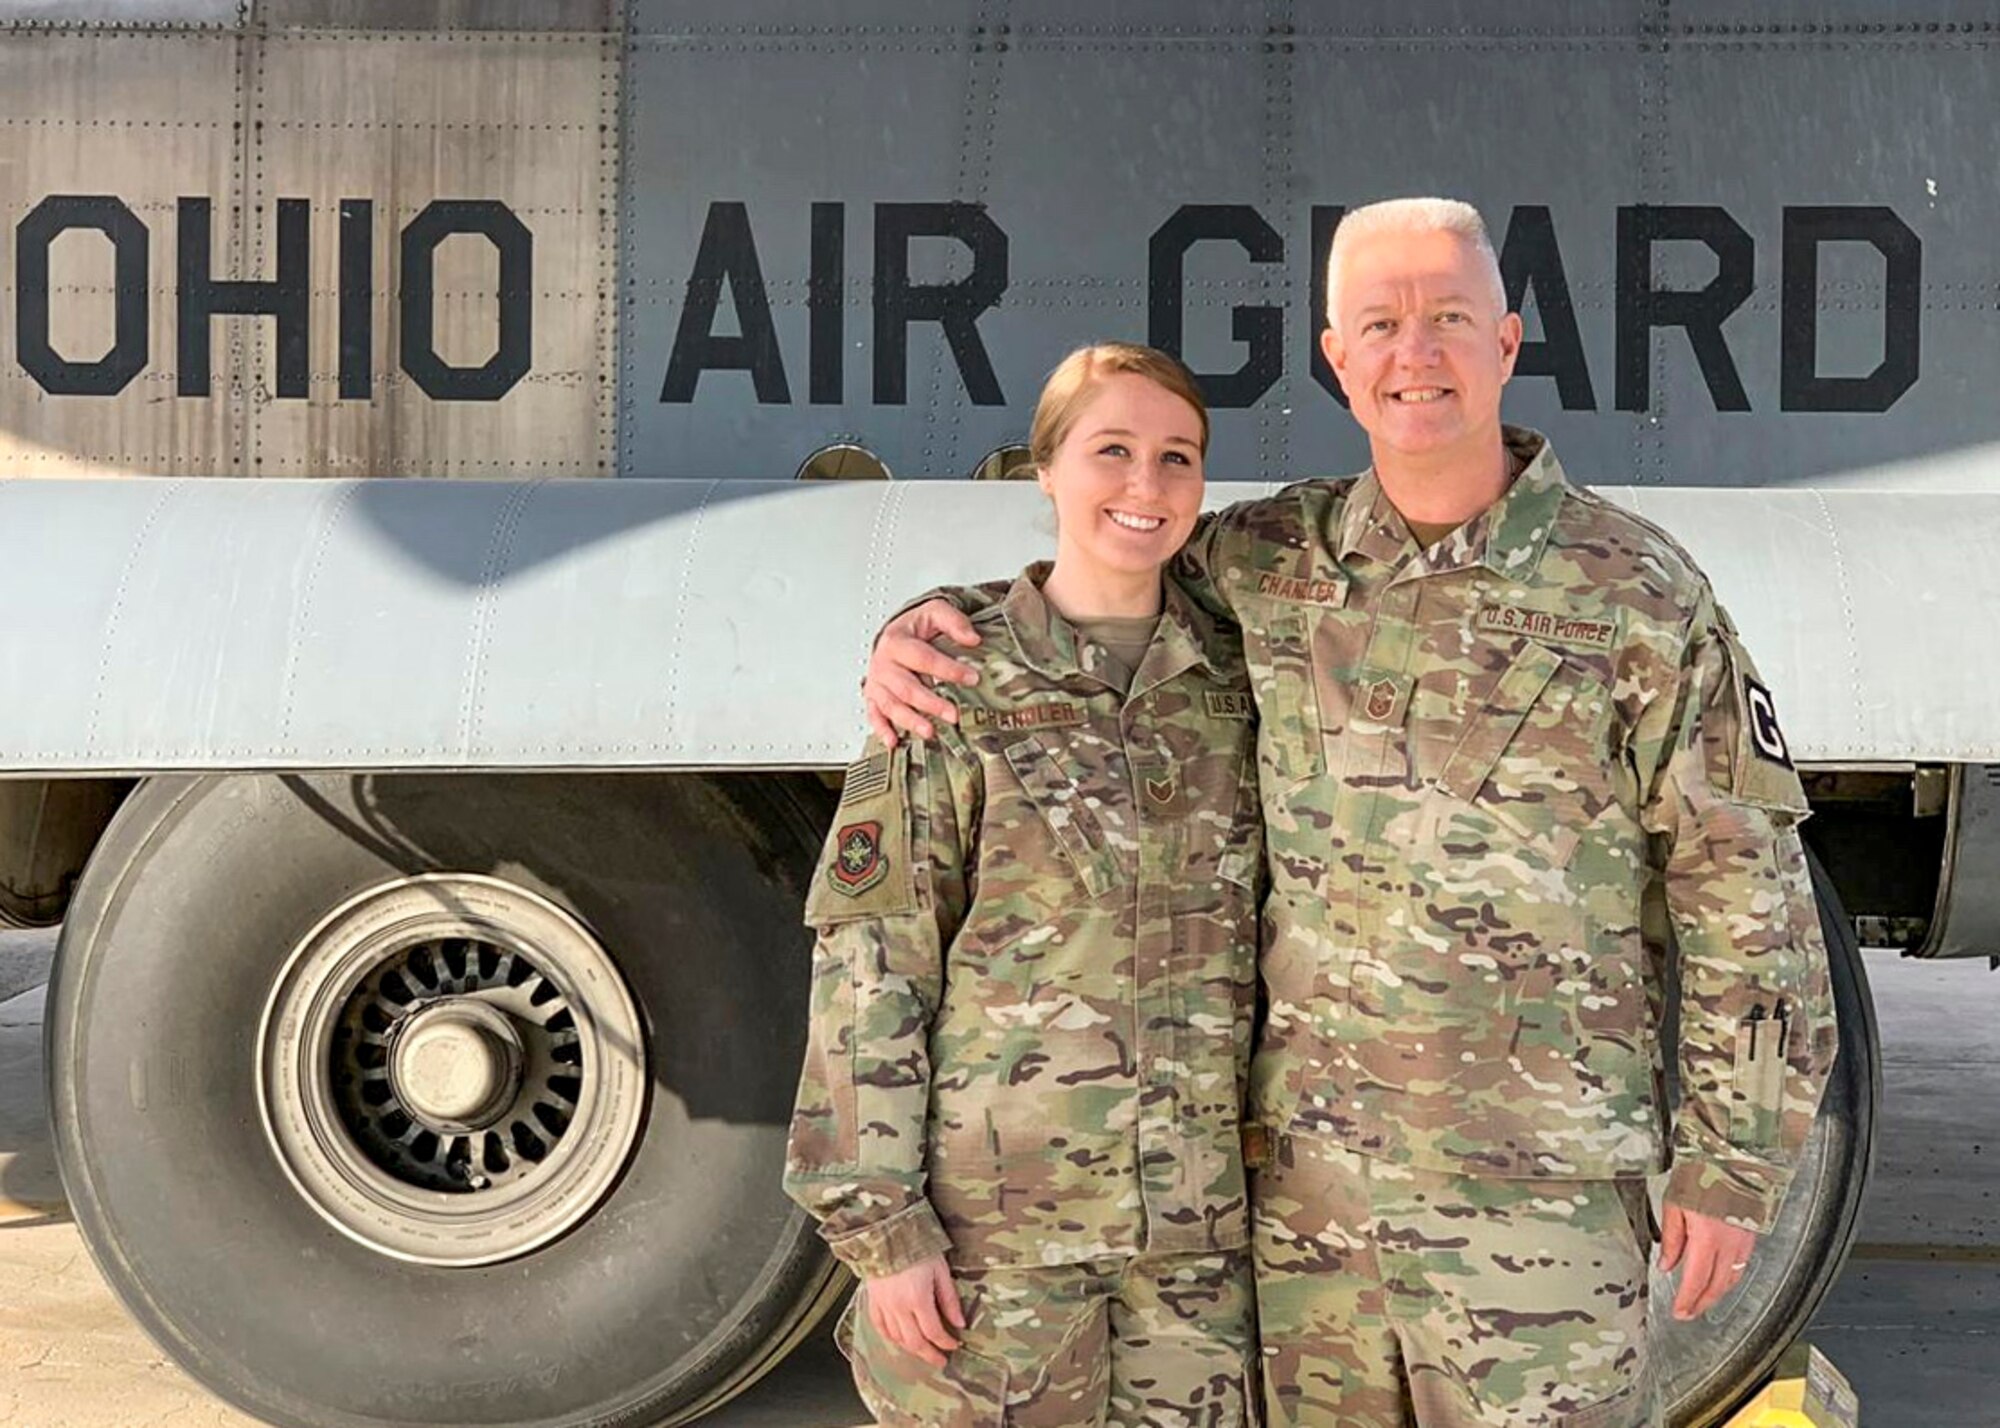 Chief Master Sgt. Ralph Chandler, 385th Aircraft Maintenance Squadron Det. 2 chief, and Staff Sgt. Madison Chandler, 779th Expeditionary Airlift Squadron aviation resource manager, pose for a photo in front of a C-130 at an undisclosed location in Southwest Asia, Feb. 18, 2019. This deployment was Madison’s first and possibly Ralph’s last, but the memories of being deployed together will last a lifetime.